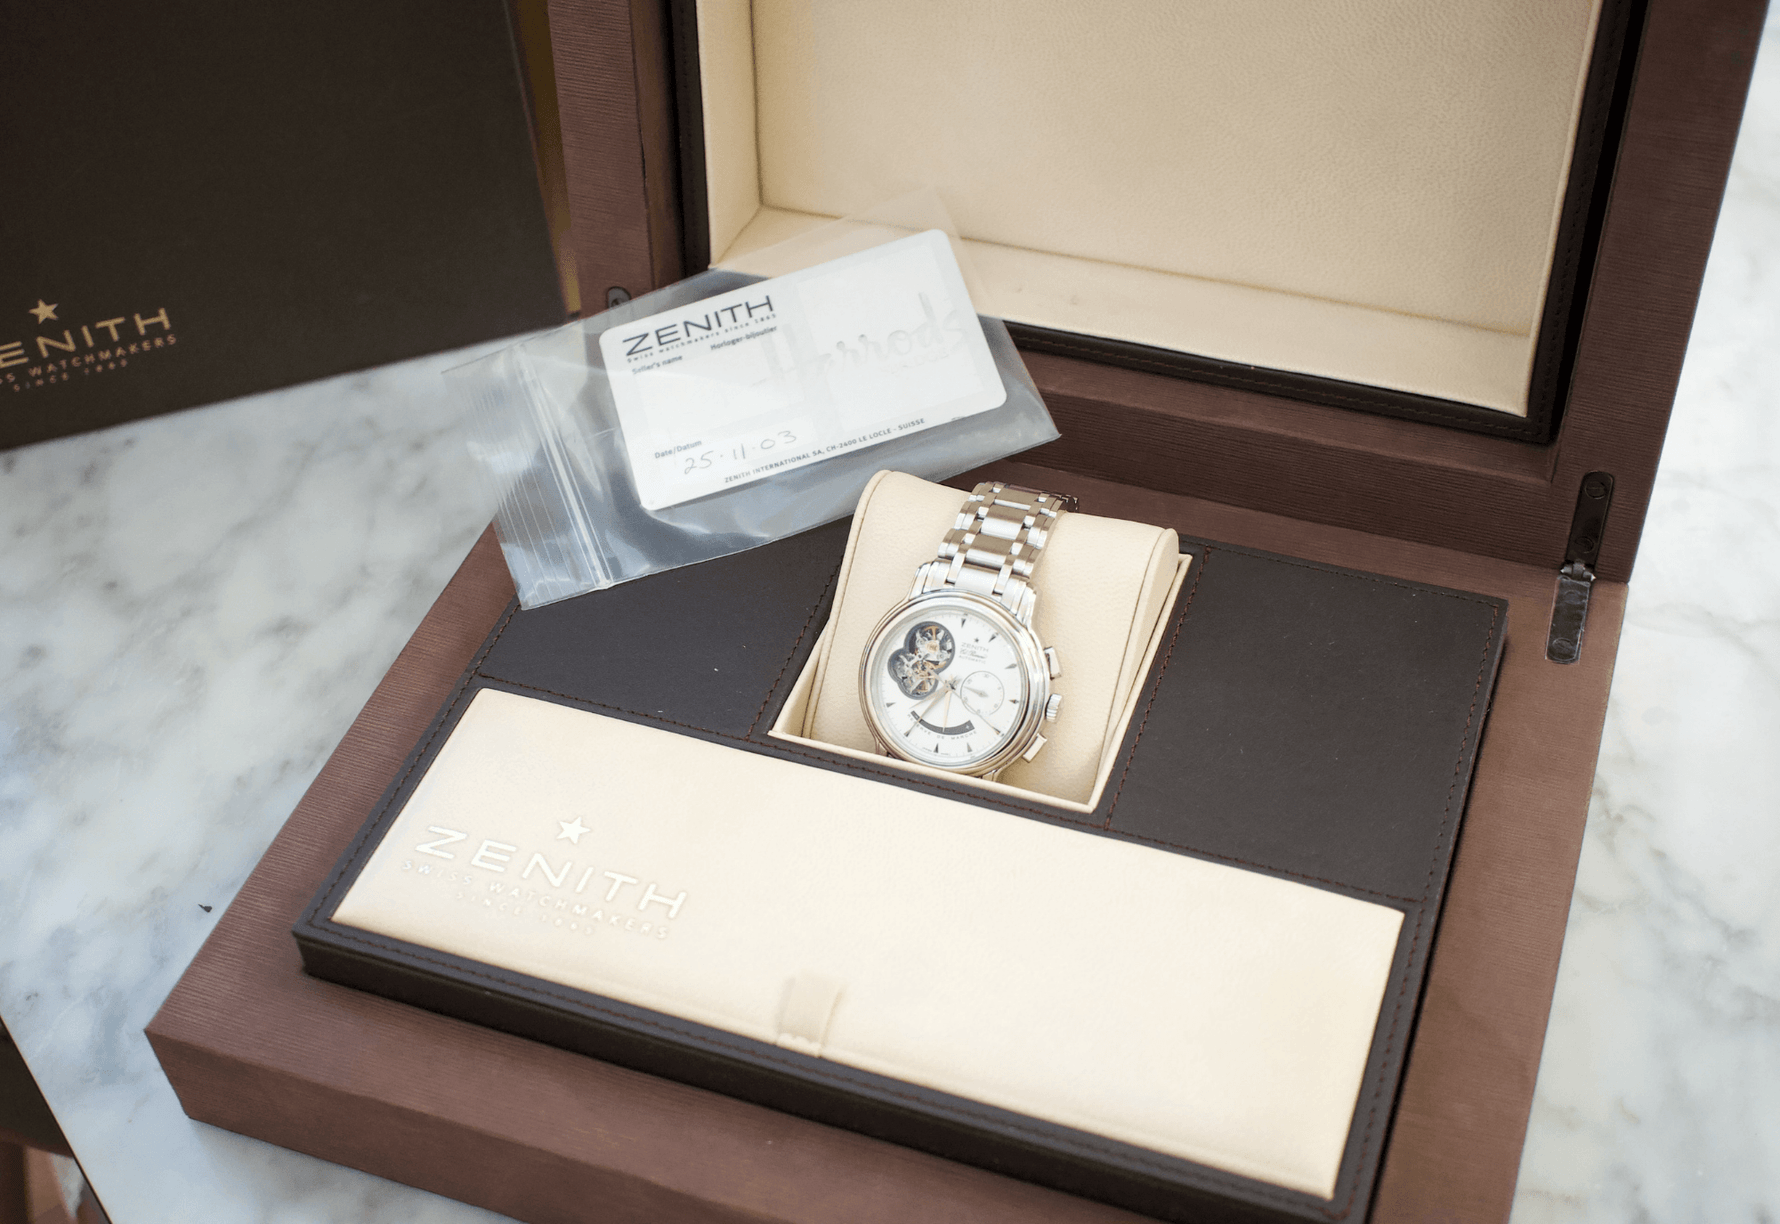 SOLD OUT: Zenith Chronomaster El Primero 03.0240.4021 40MM Open Chronograph White Steel Box and Papers 2003 - WearingTime Luxury Watches